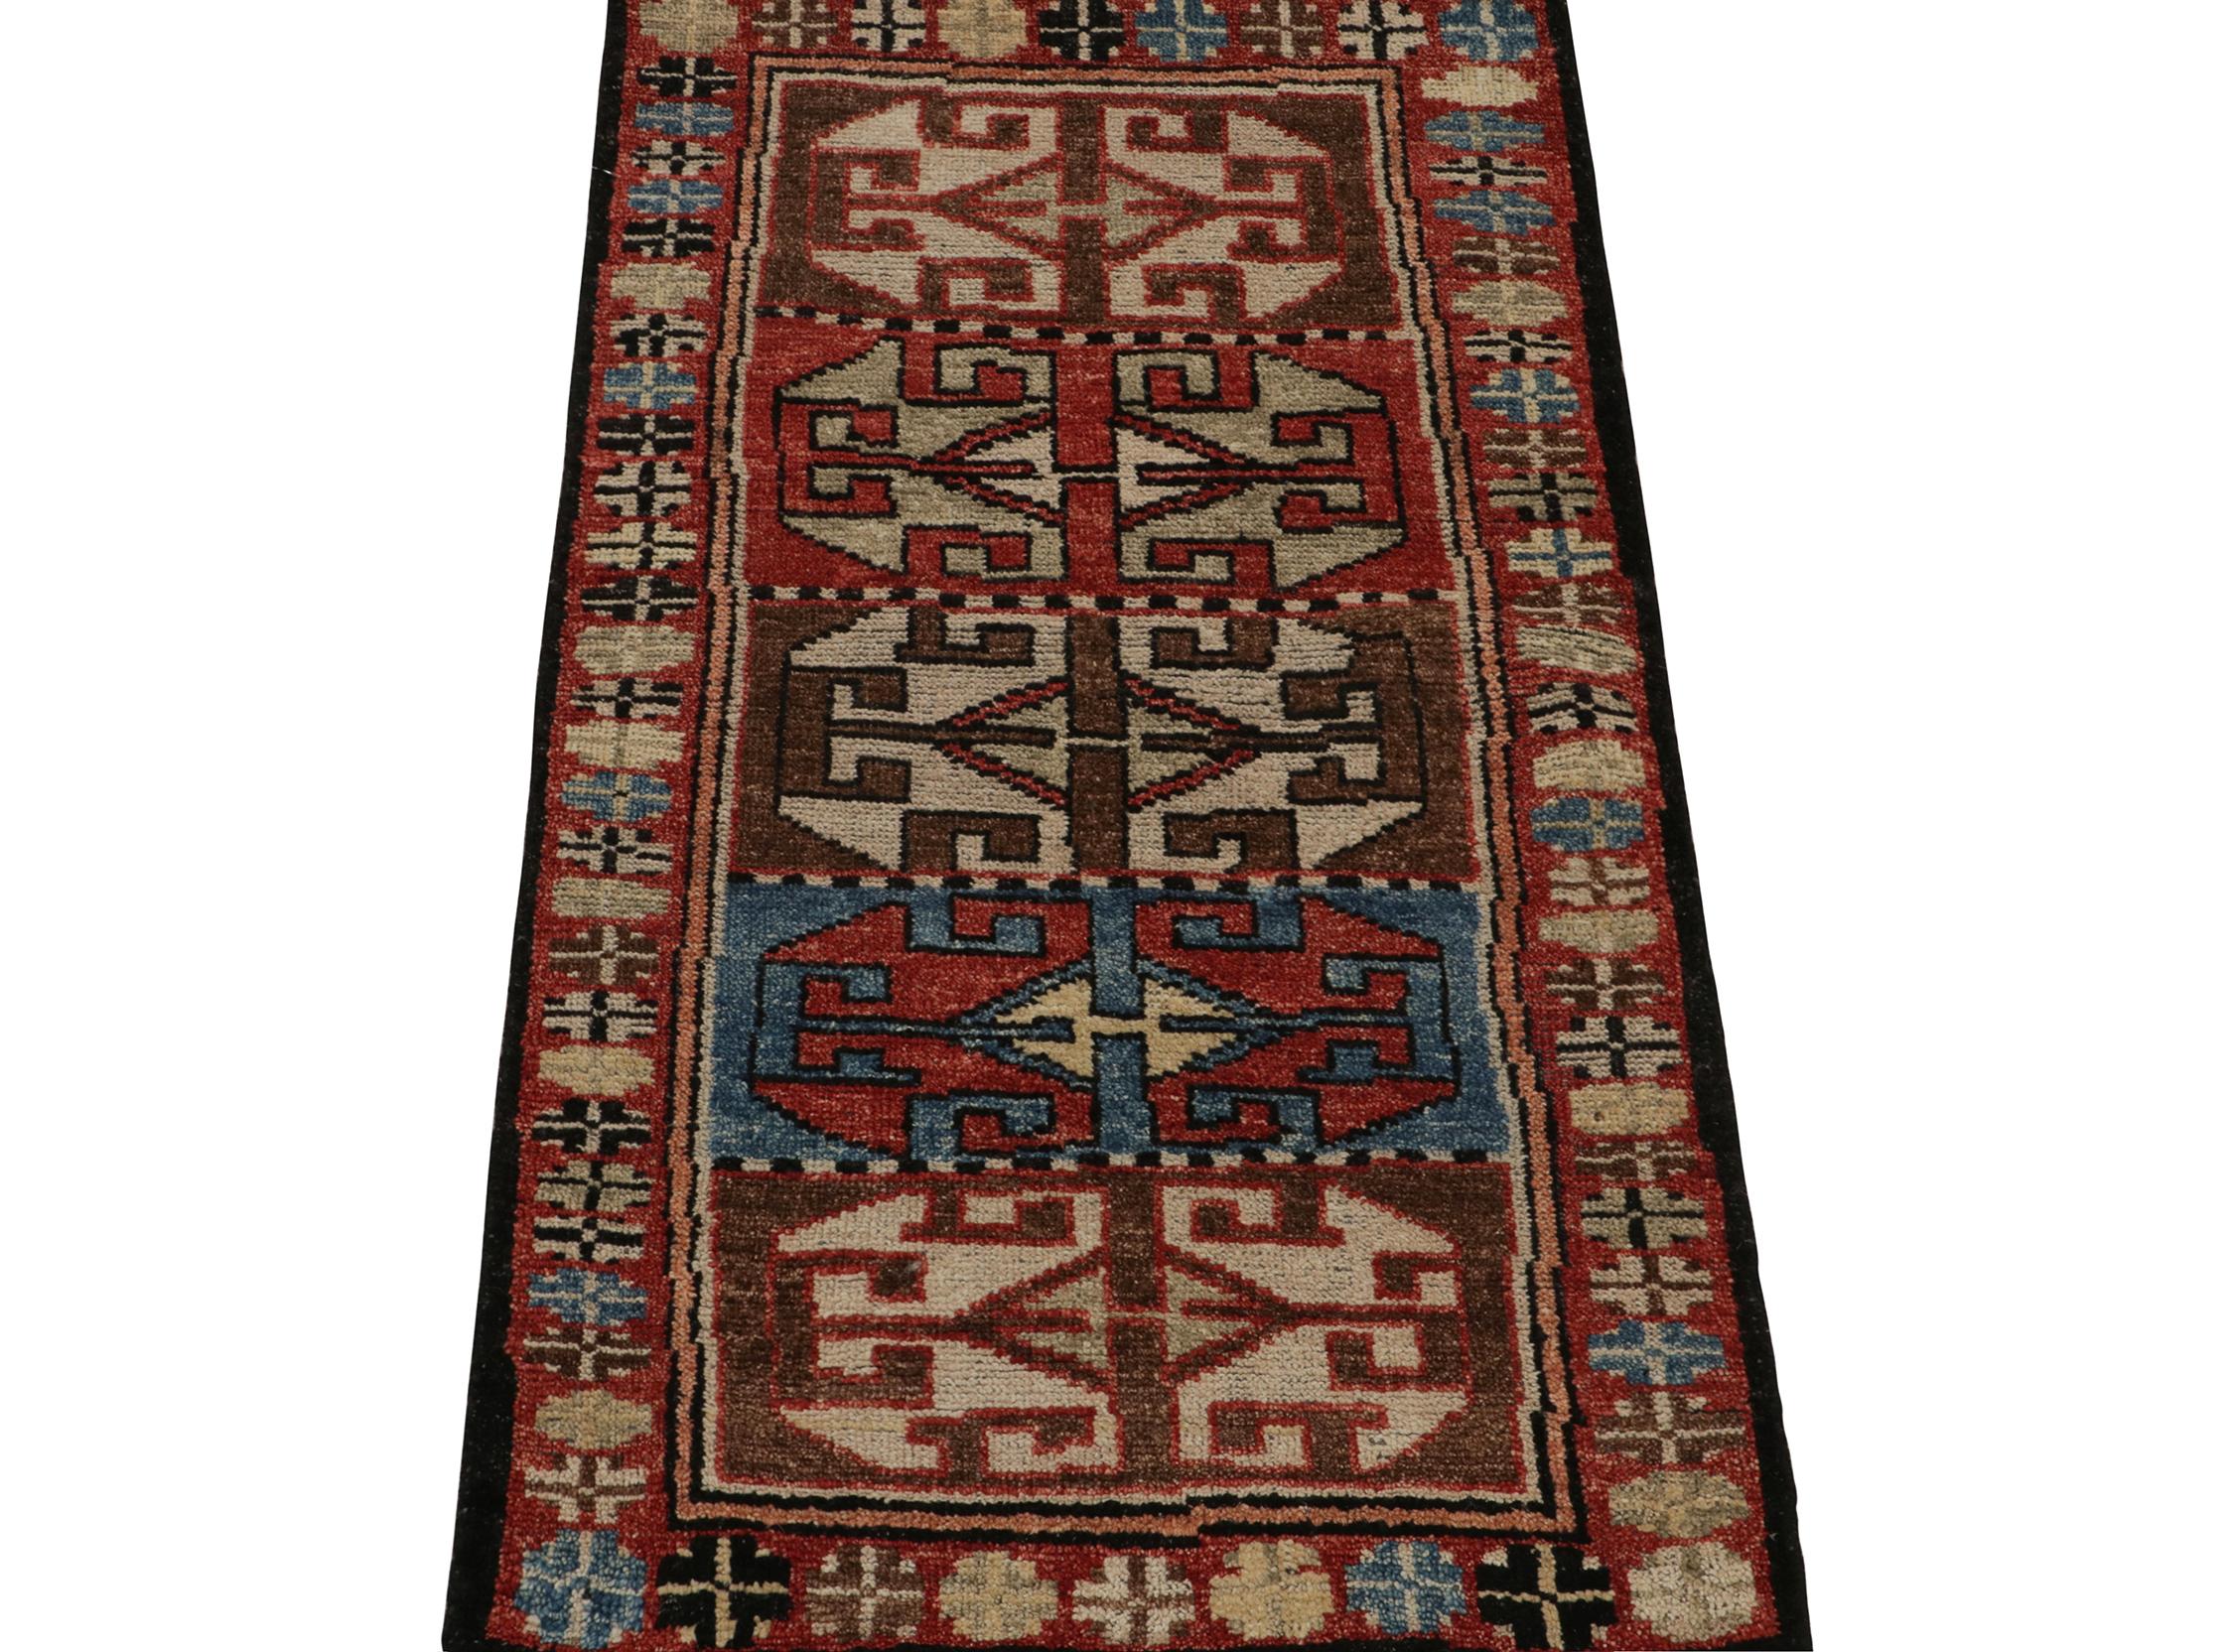 Indian Rug & Kilim’s Tribal style rug in Red, Brown and Blue geometric pattern For Sale